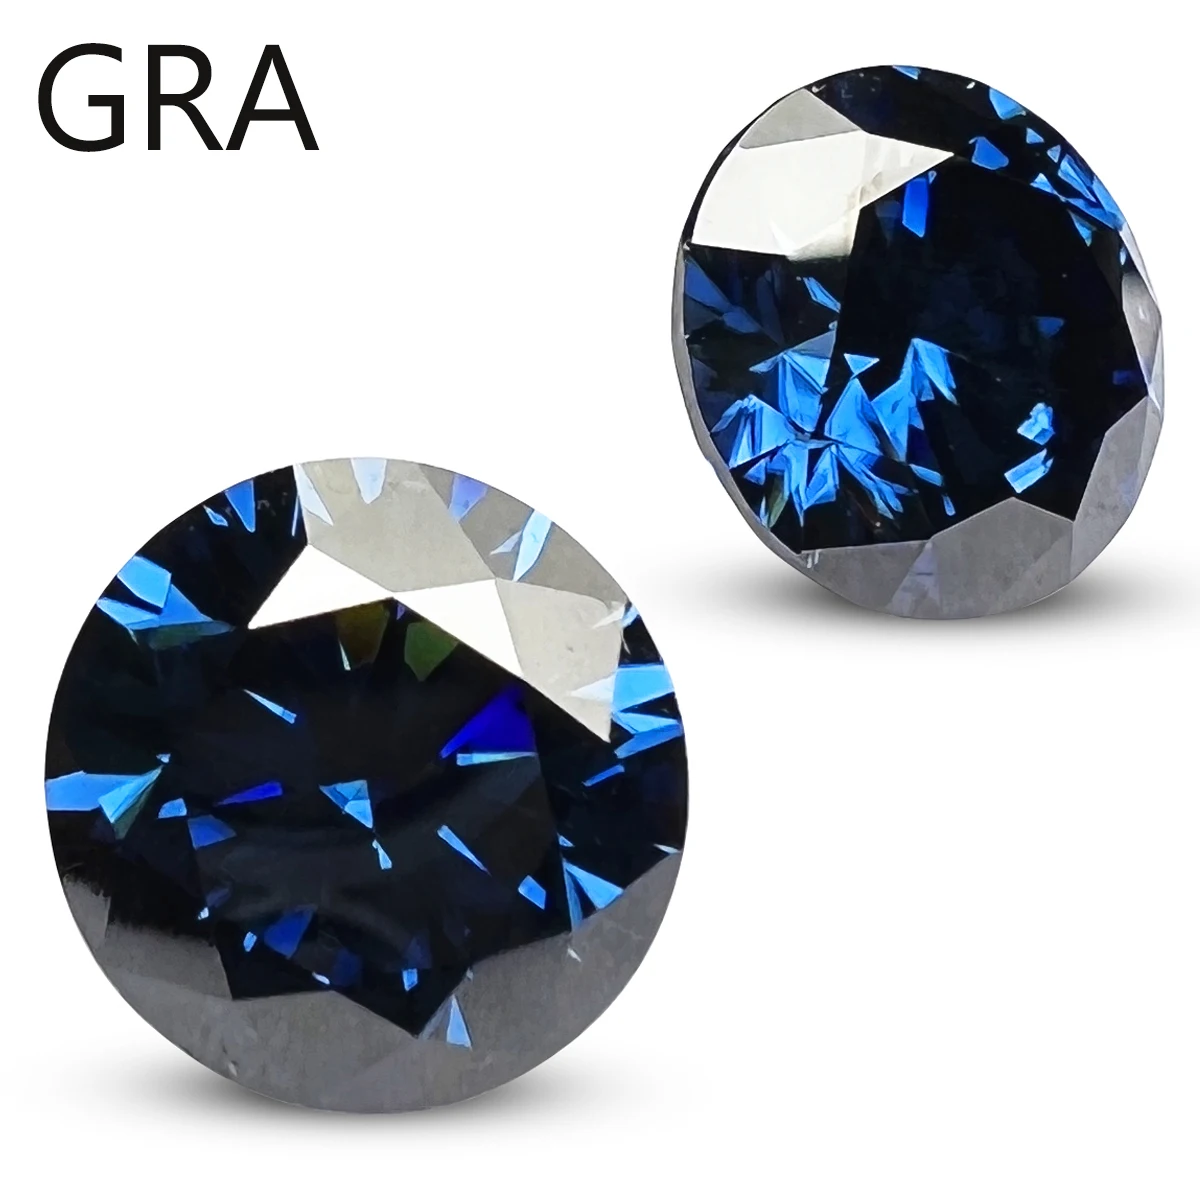 

GRA Round Blue Moissanite Stones 0.3ct to 20ct Excellent VVS1 Cut Lab Loose Gems Pass Diamond Tester for Fine Jewelry Making